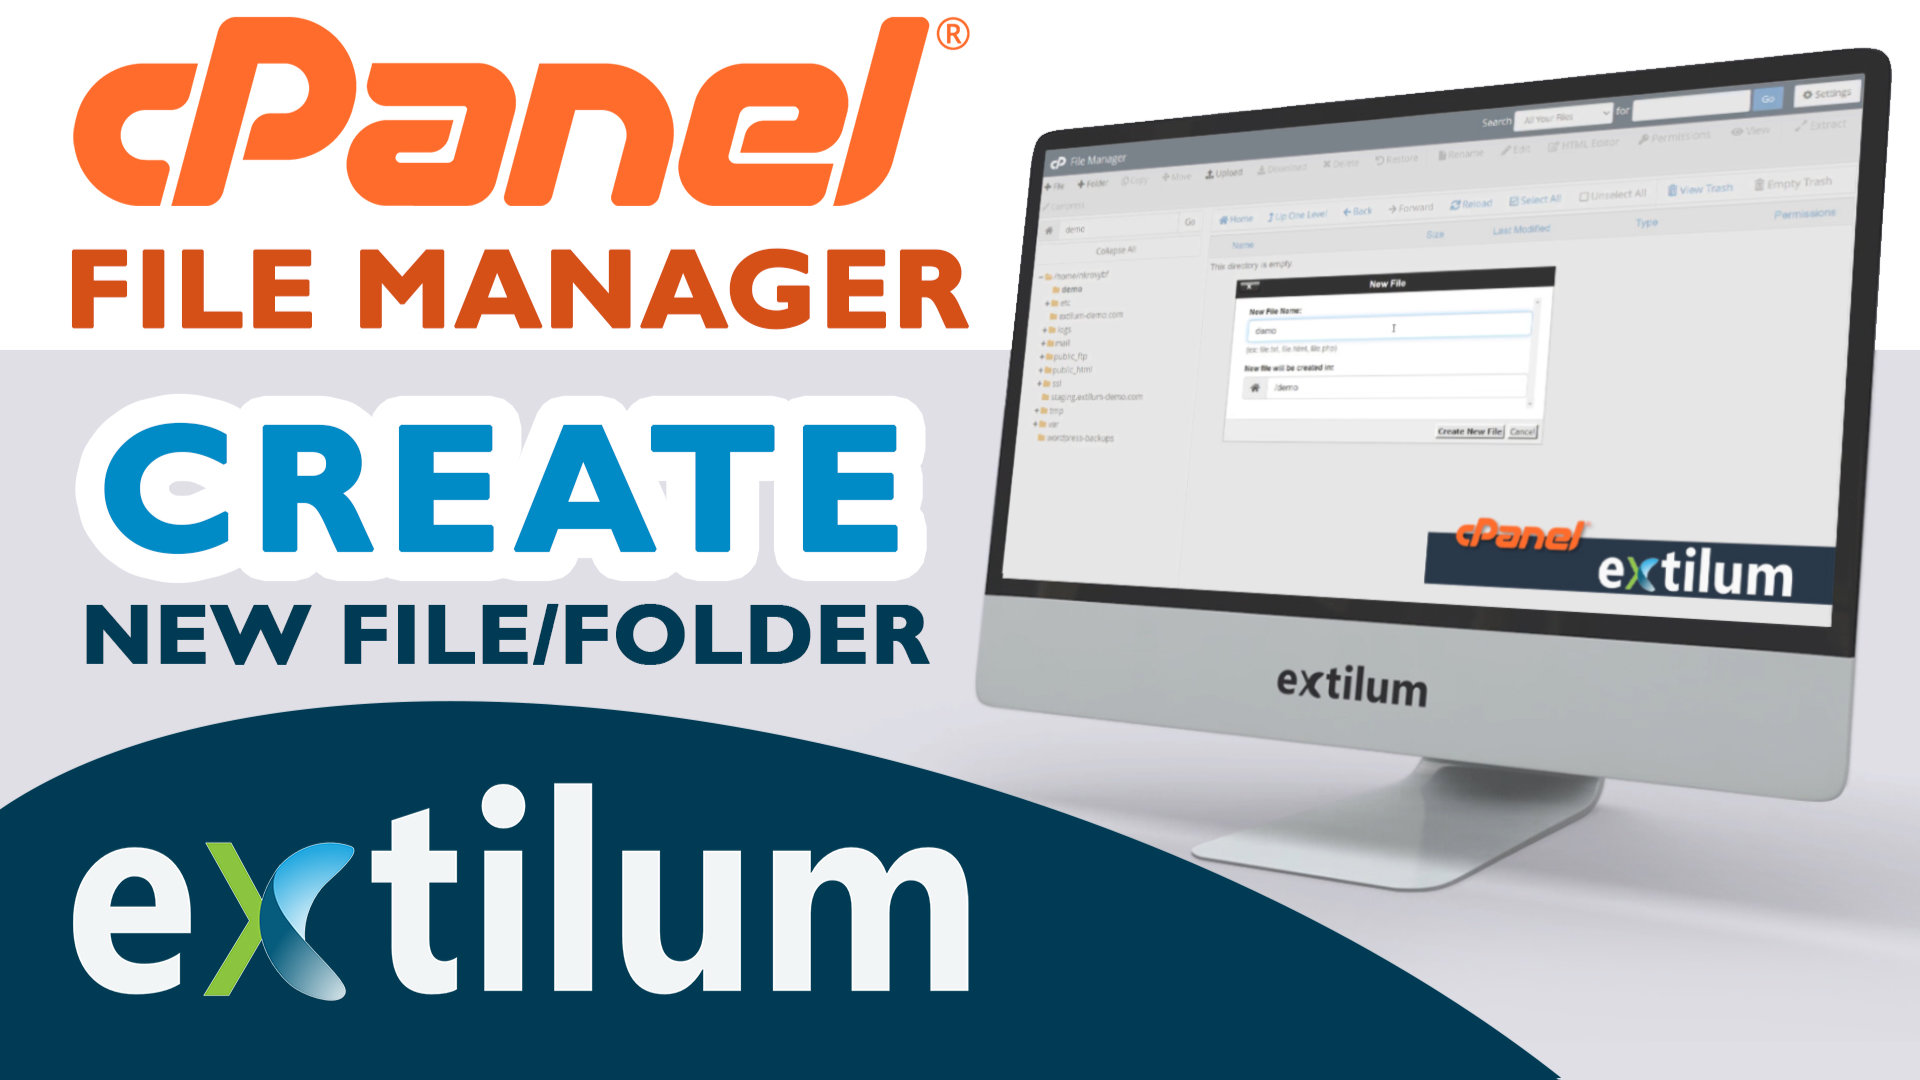 Extilum cpanel - file manager - new file and folder